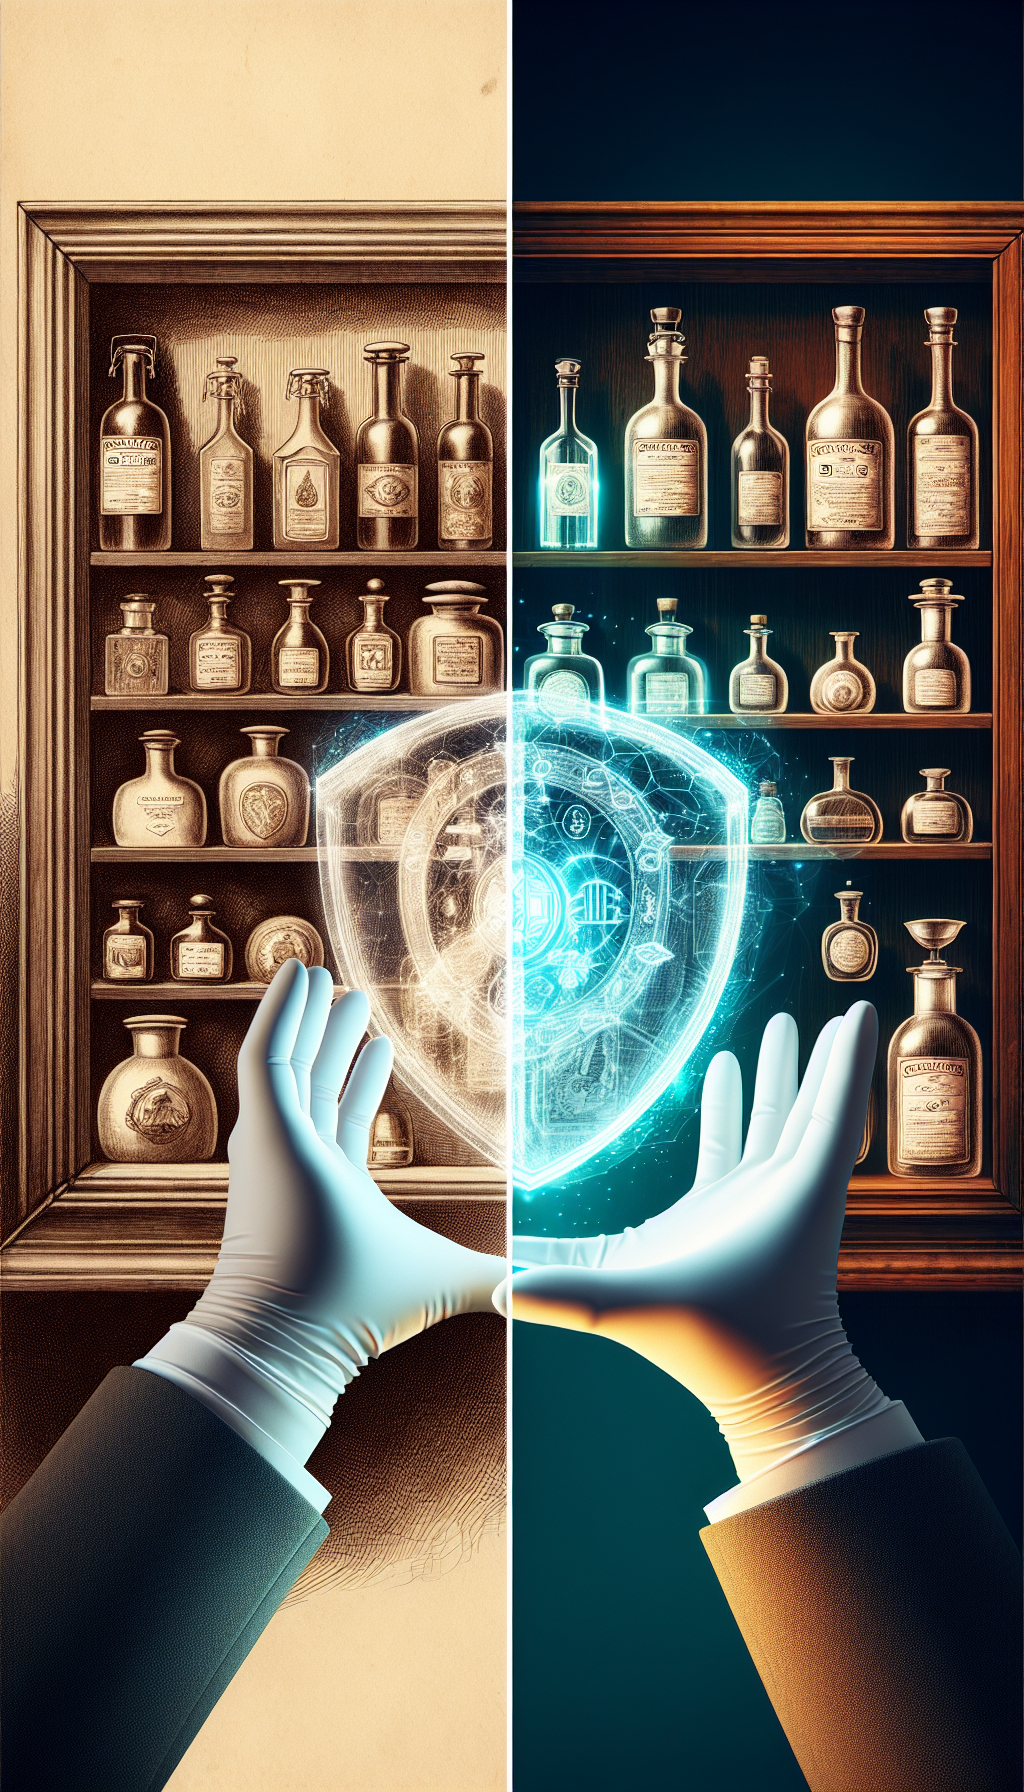 A vibrant, split-style illustration depicts a vintage wooden shelf. On the left, sketched in sepia tones, antique Duraglas bottles gleam, carefully aligned and labeled. To the right, the scene shifts to a colorful, modern look where hands in white gloves tenderly dust a bottle, symbolizing its value. Above, a transparent shield icon suggests preservation, uniting past and present care practices.